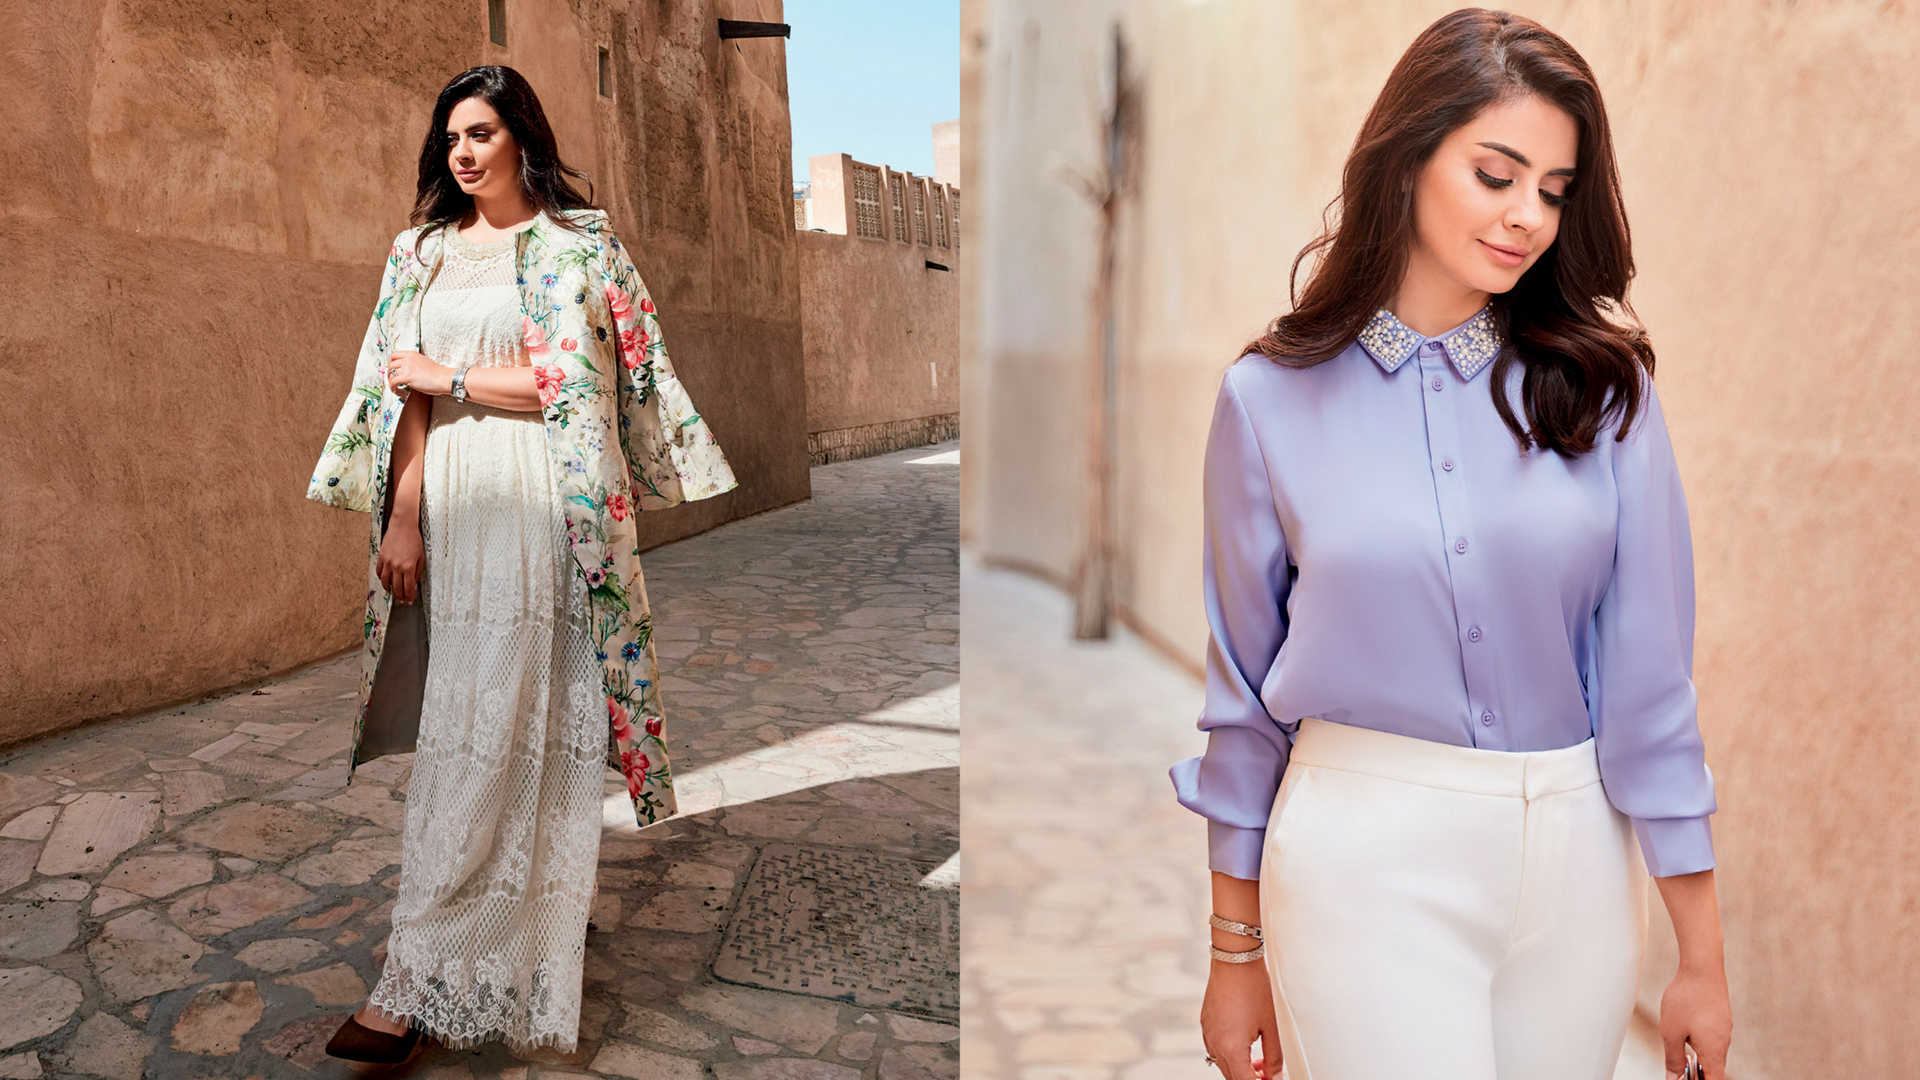 The Best Ramadan 2018 Capsule Collections